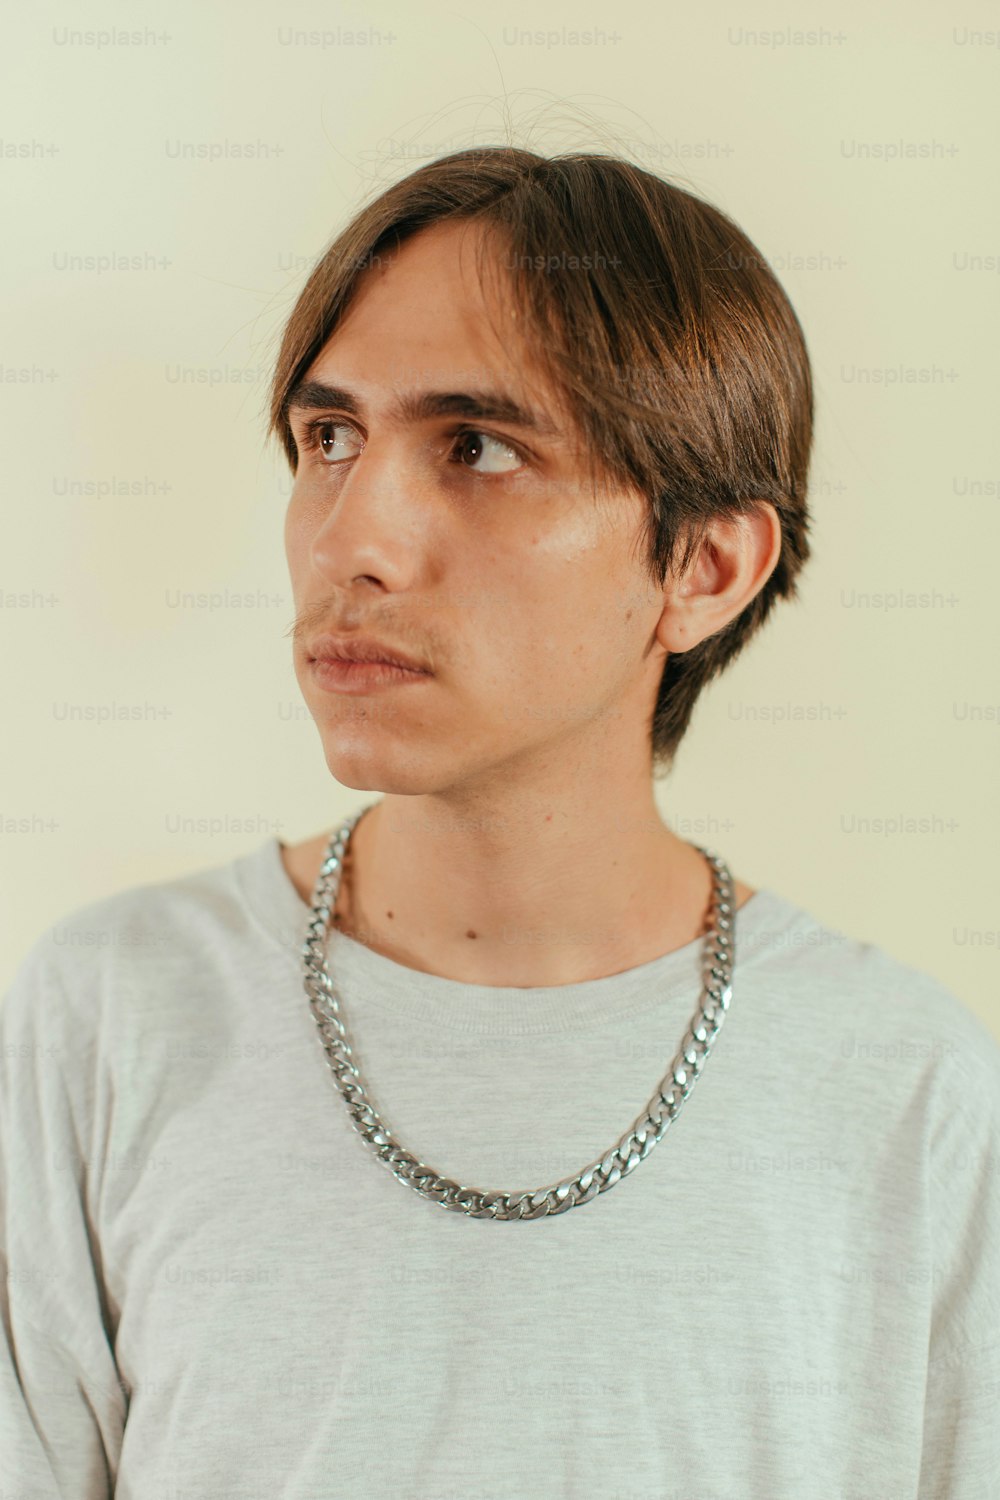 a person with a necklace